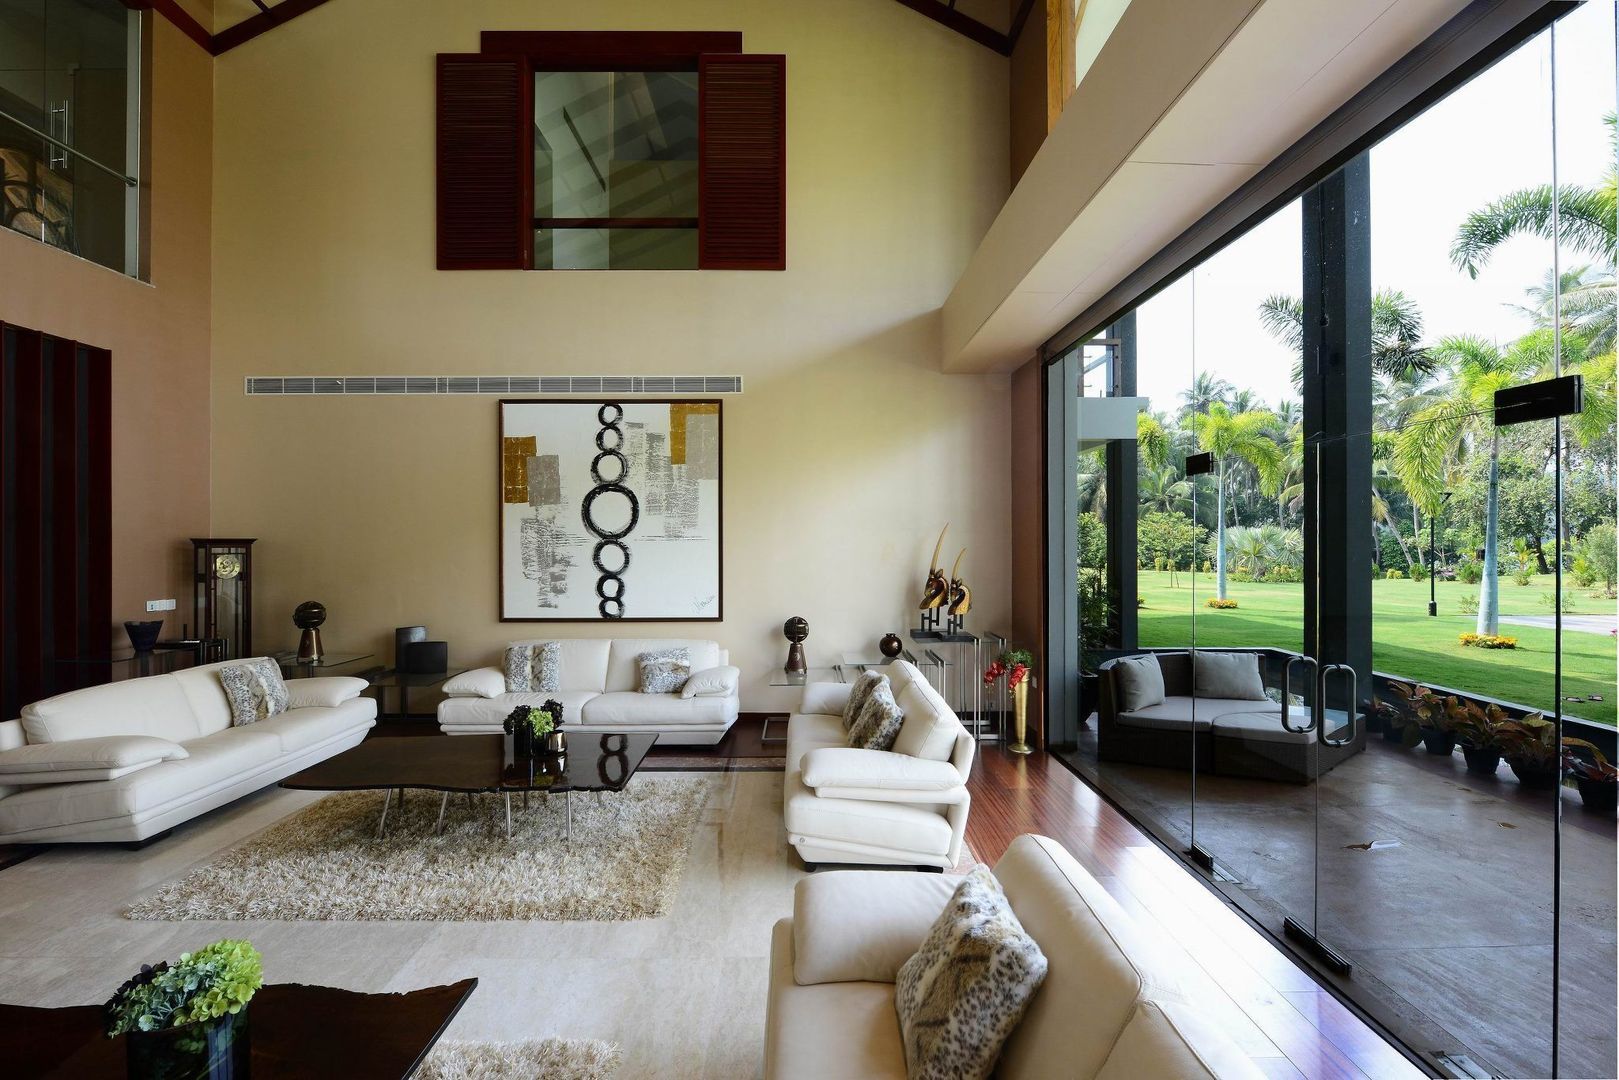 PRIVATE RESIDENCE AT KERALA(CALICUT)INDIA, TOPOS+PARTNERS TOPOS+PARTNERS Klassische Wohnzimmer